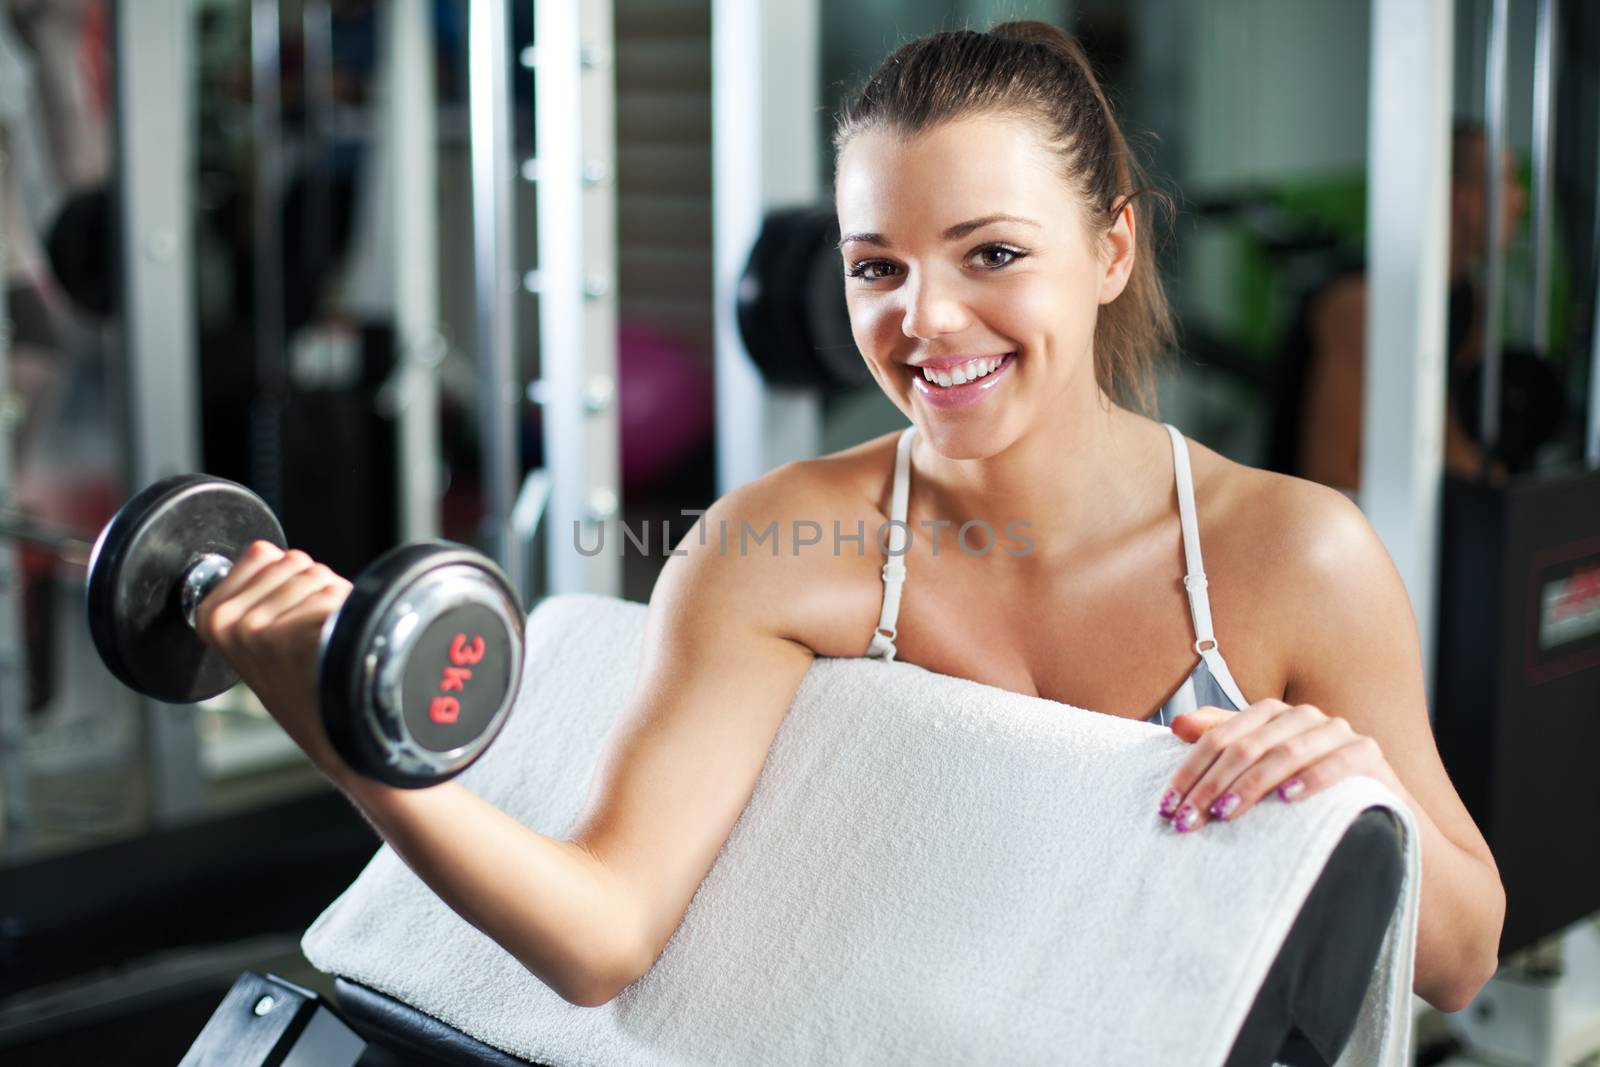 Cute Sporty young woman doing exercise in a fitness center. She is working exercises to strengthen her biceps.